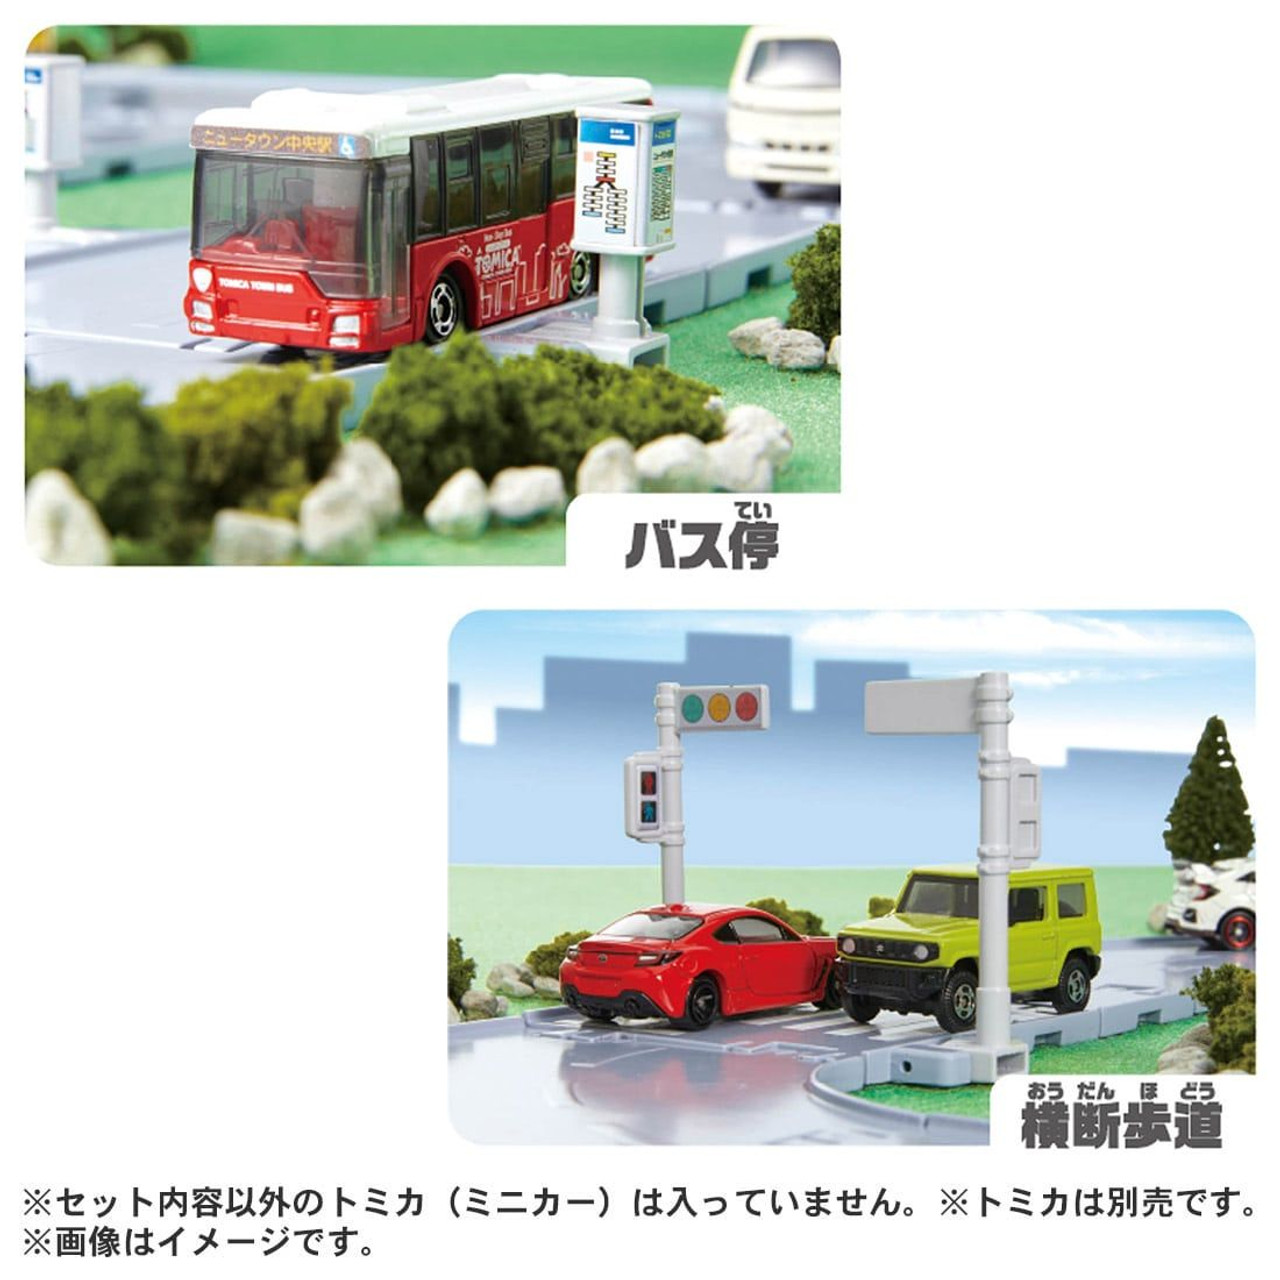 Tomica World A Lot of Towns and Roads! Tomica Town Set (w/ Tomica)